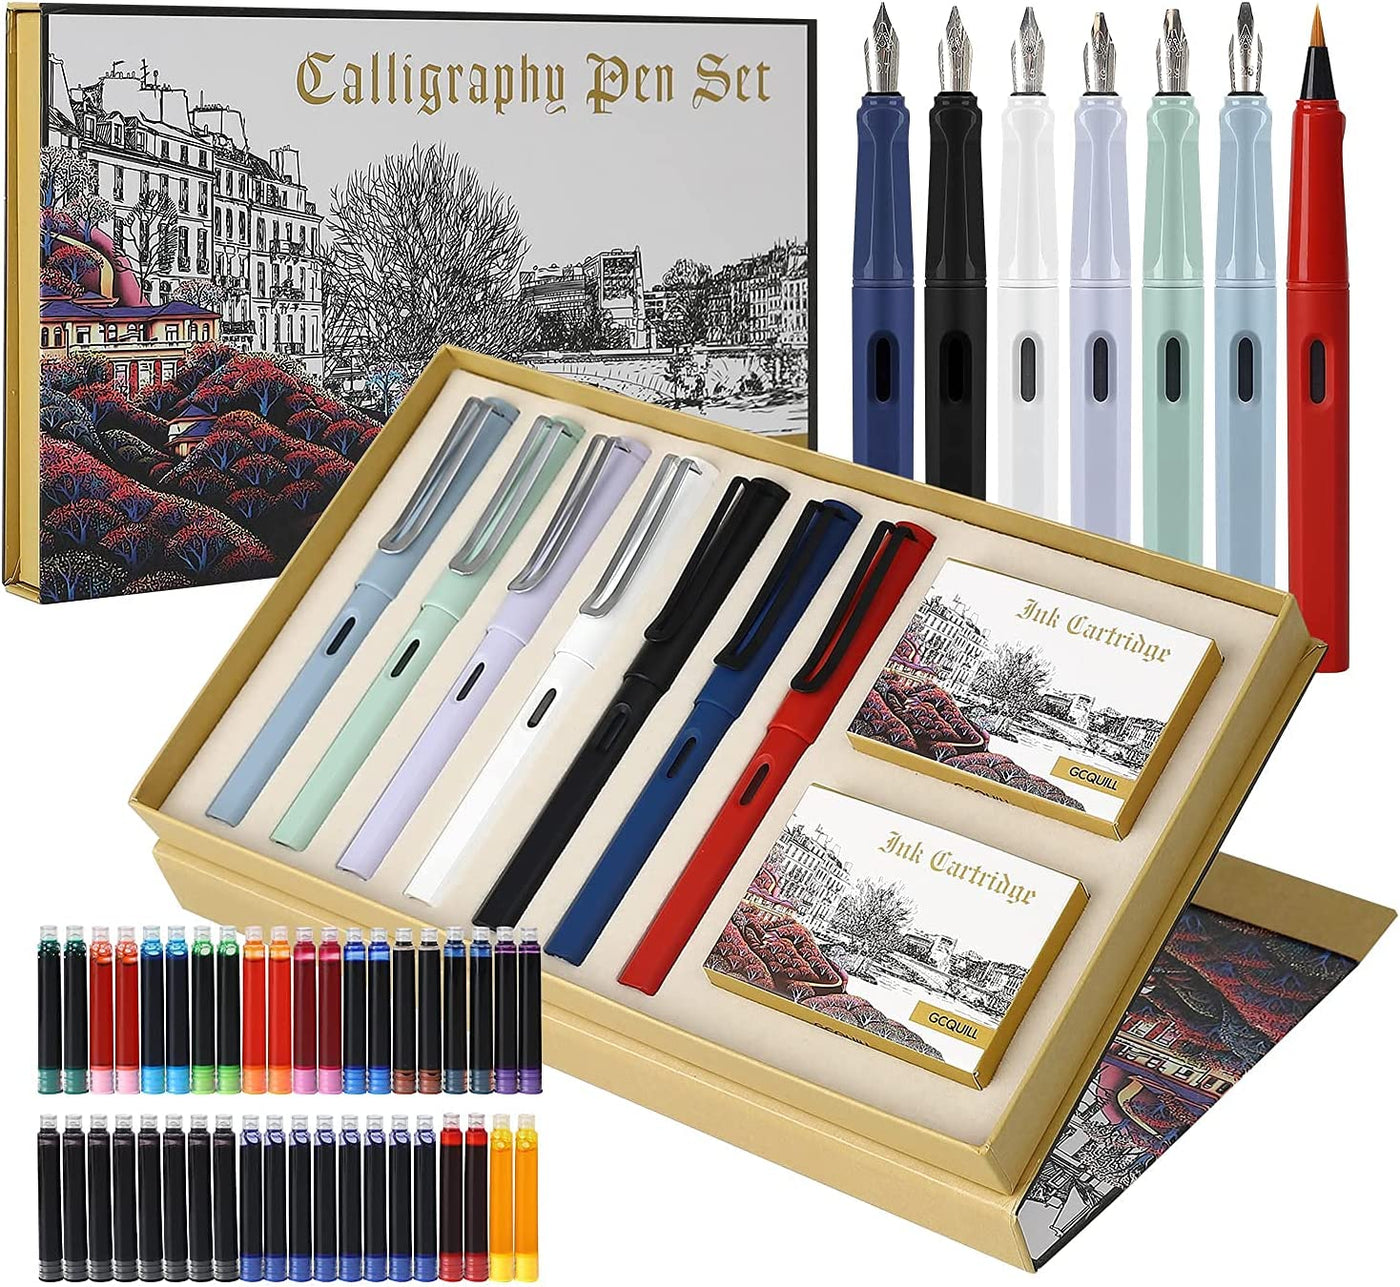 DTianSir Calligraphy Pen set,Fountain Pens with 7 Different Replaceable  Nibs with 60 Ink Cartridges(12 Colors),Calligraphy set for Beginner Writing